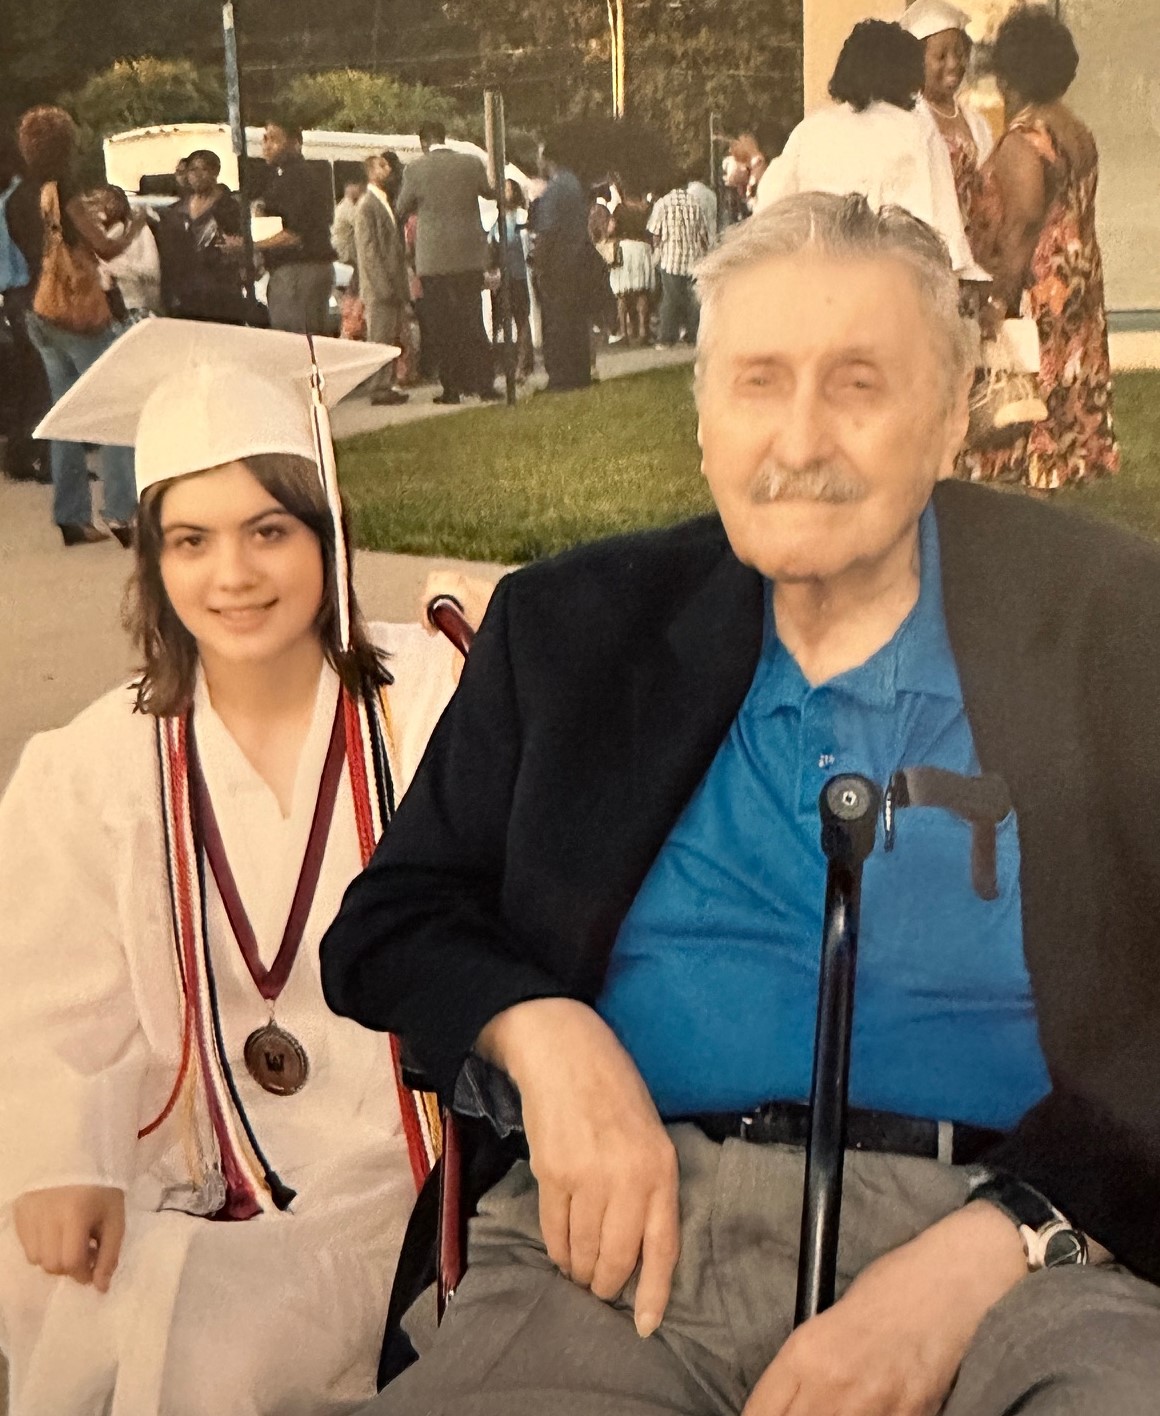 Our middle daughter at her graduation with her grandfather